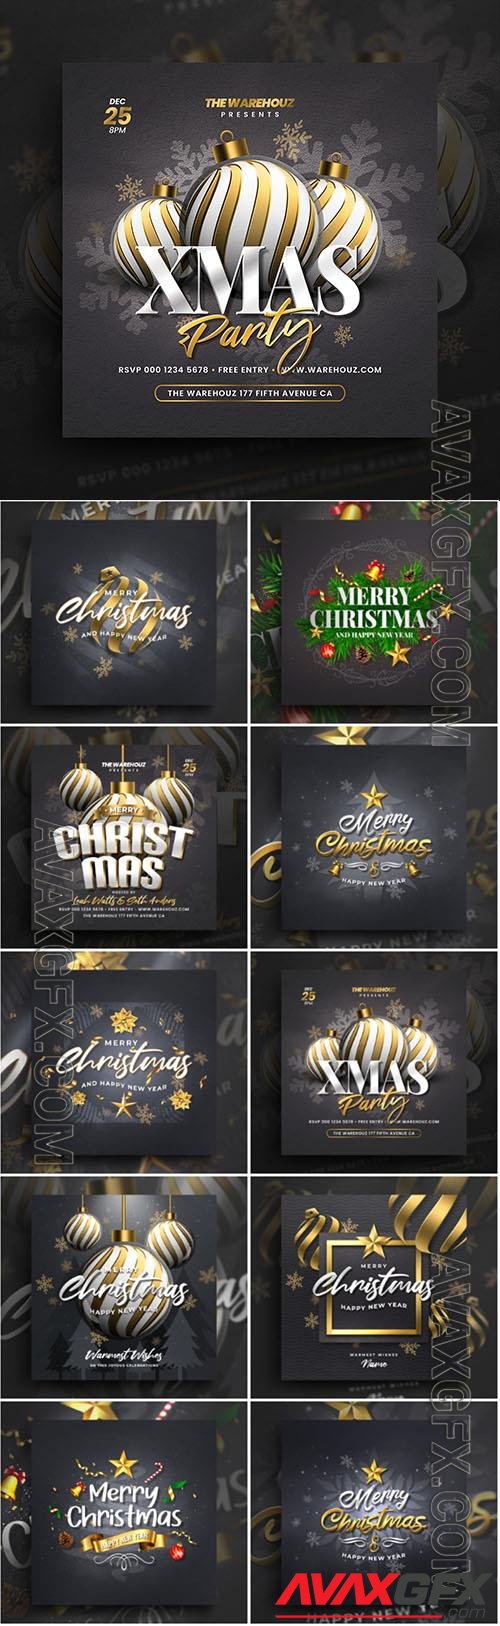 PSD christmas party flyer invitation social media post and web banner